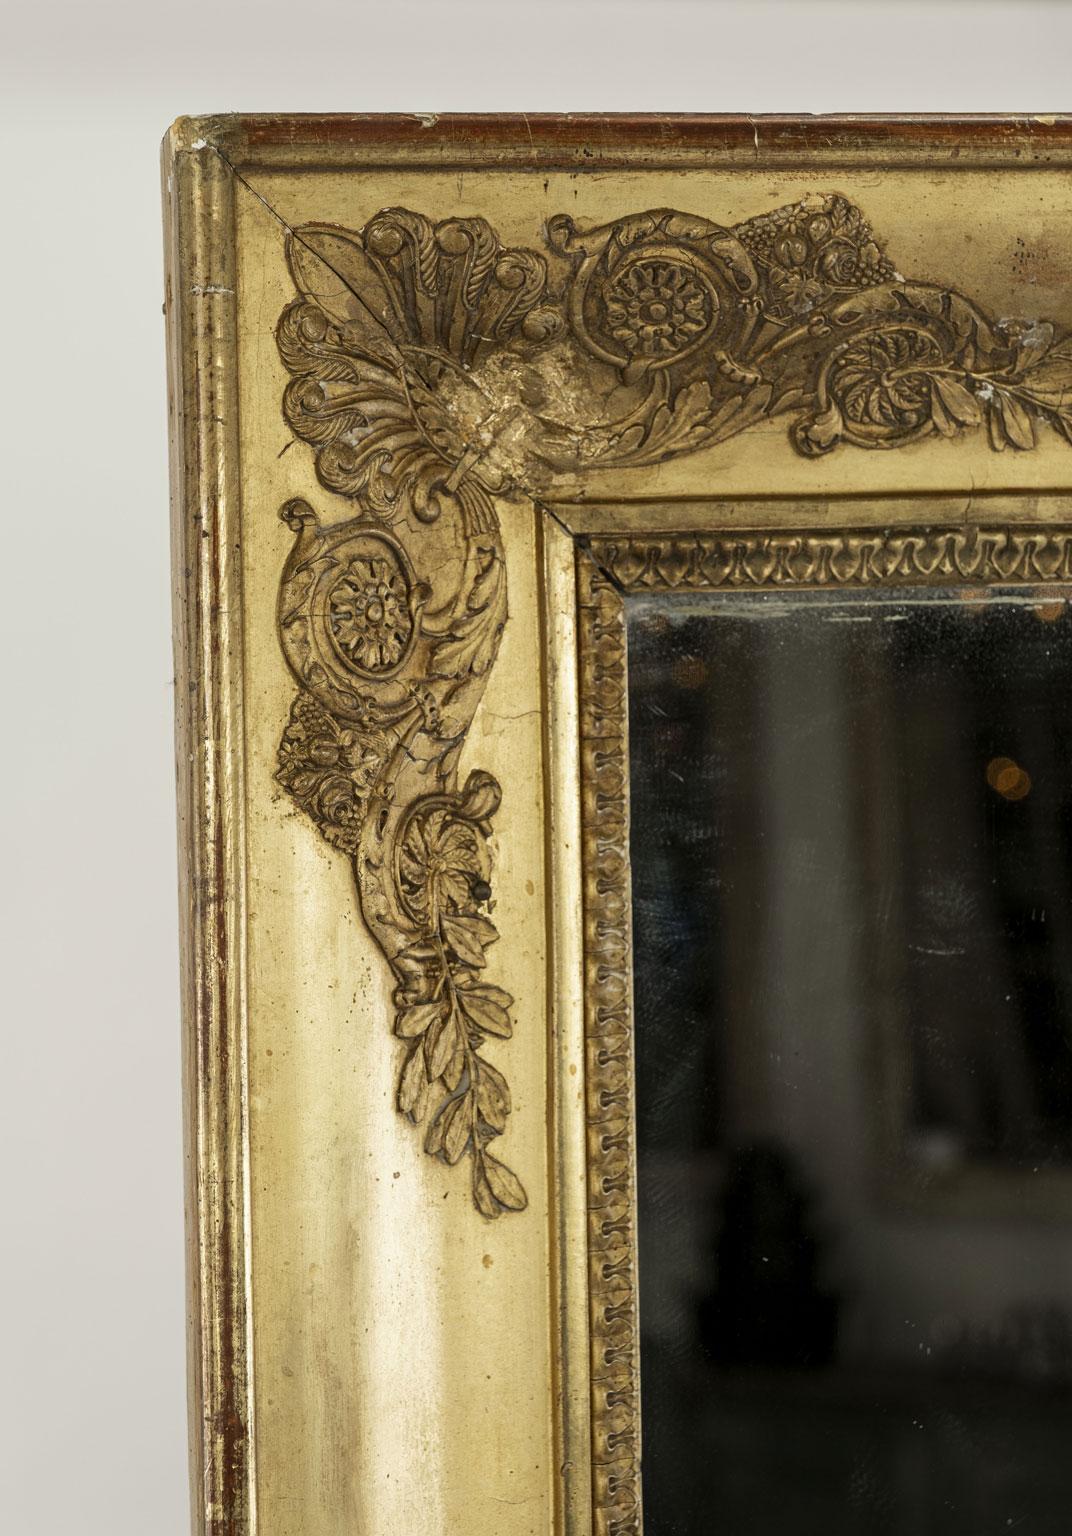 Restauration period giltwood mirror with early - or original - mercury mirror glass (circa 1815-1830). Small amounts of diamond dust around edges.

Note: Regional differences in humidity and climate during shipping may cause antique and vintage wood